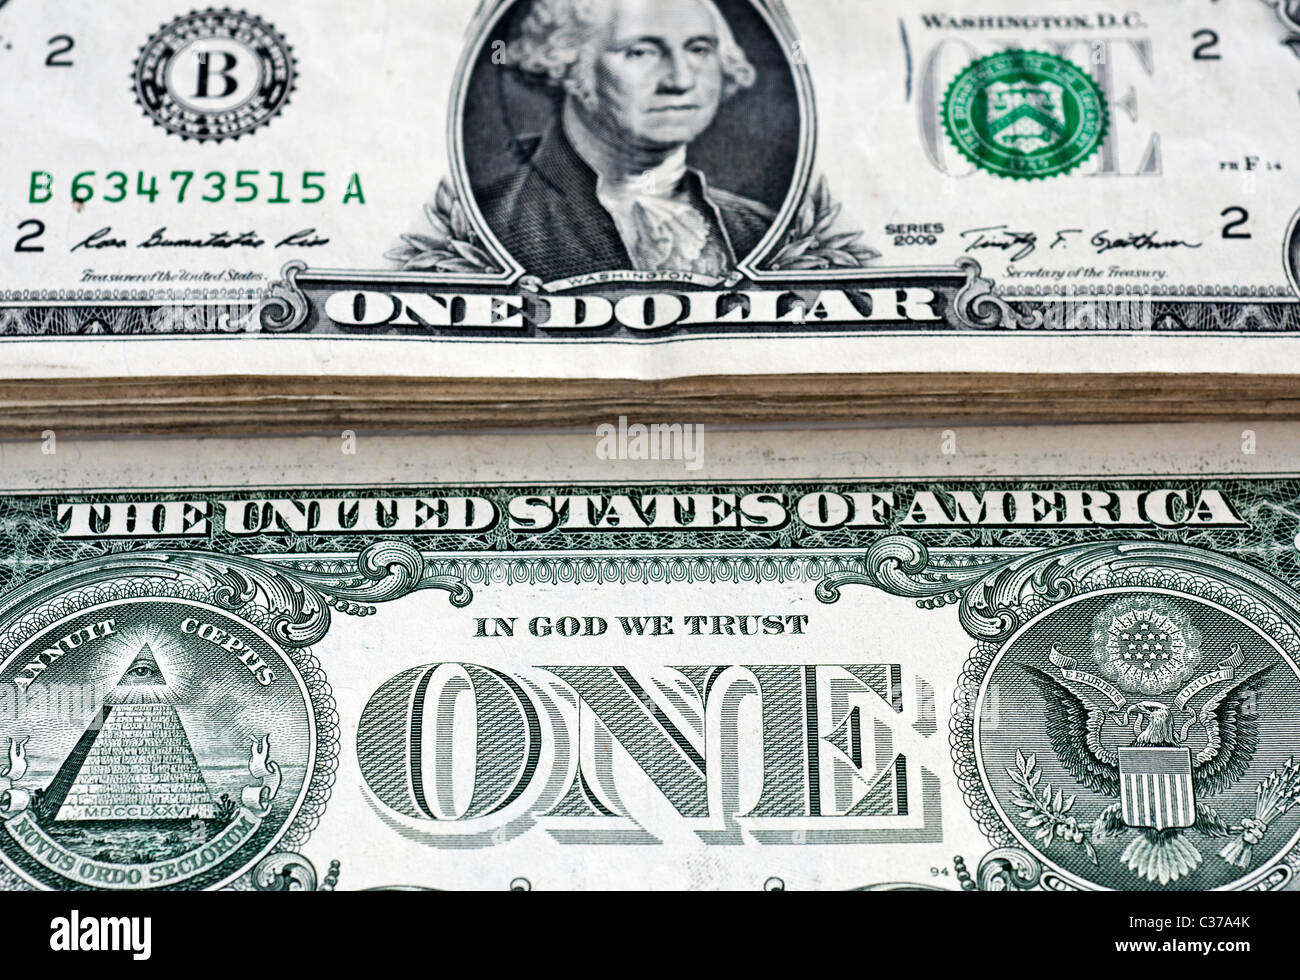 A close up of 'IN GOD WE TRUST' as seen on an American one dollar bill (US$1.00) Stock Photo